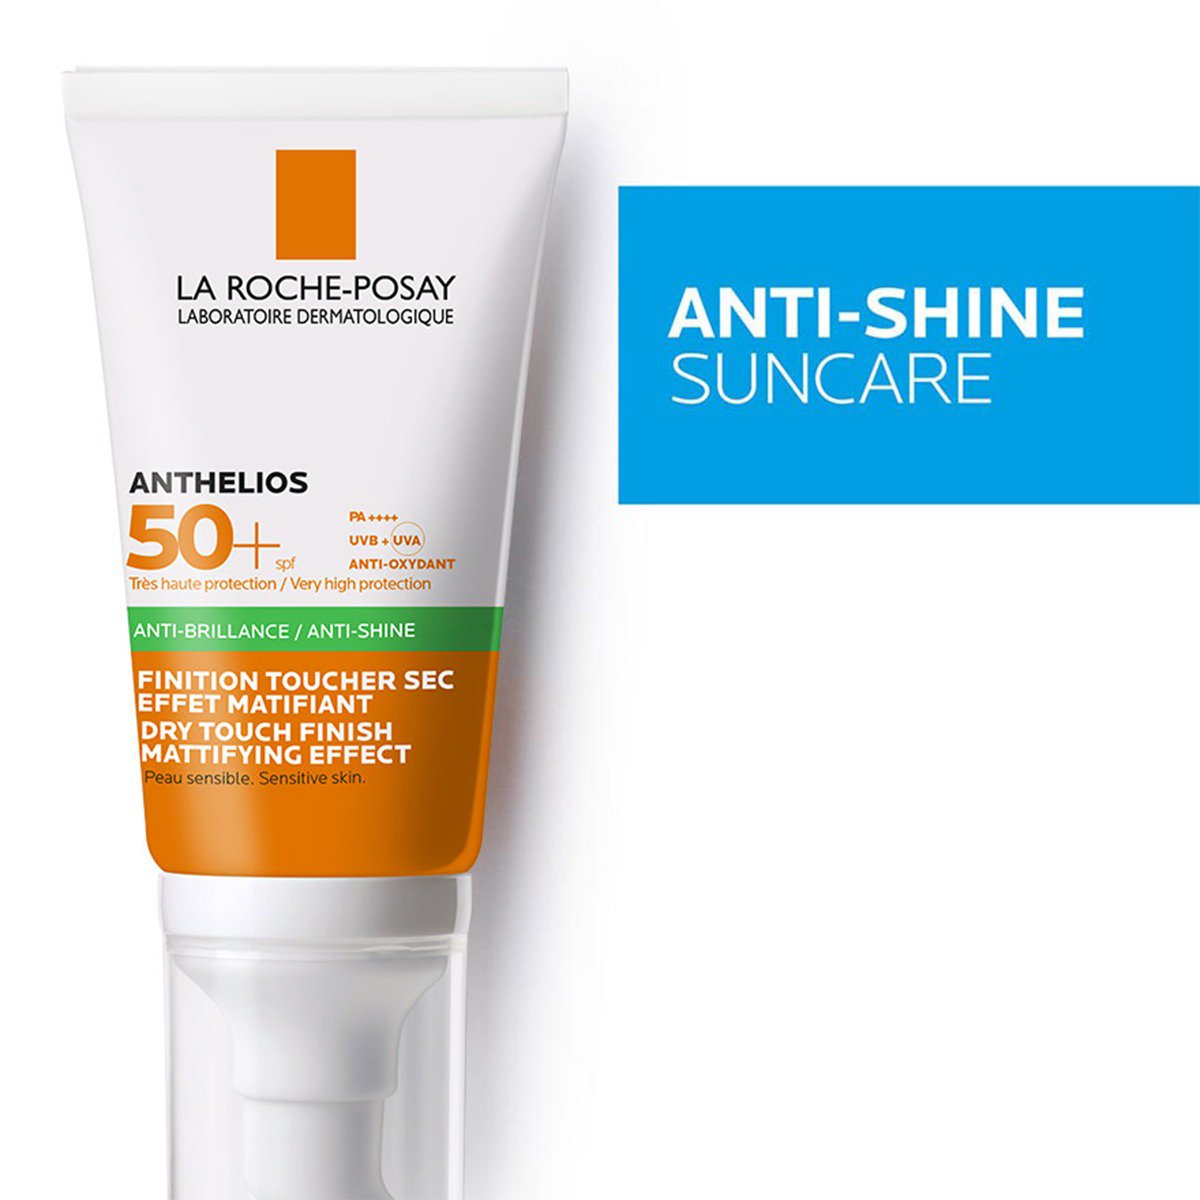 ANTHELIOS XLDRY TOUCH GEL-CREAM SPF50+ | : NON-PERFUMED FACIAL SUNSCREEN FOR OILY SKIN by La 